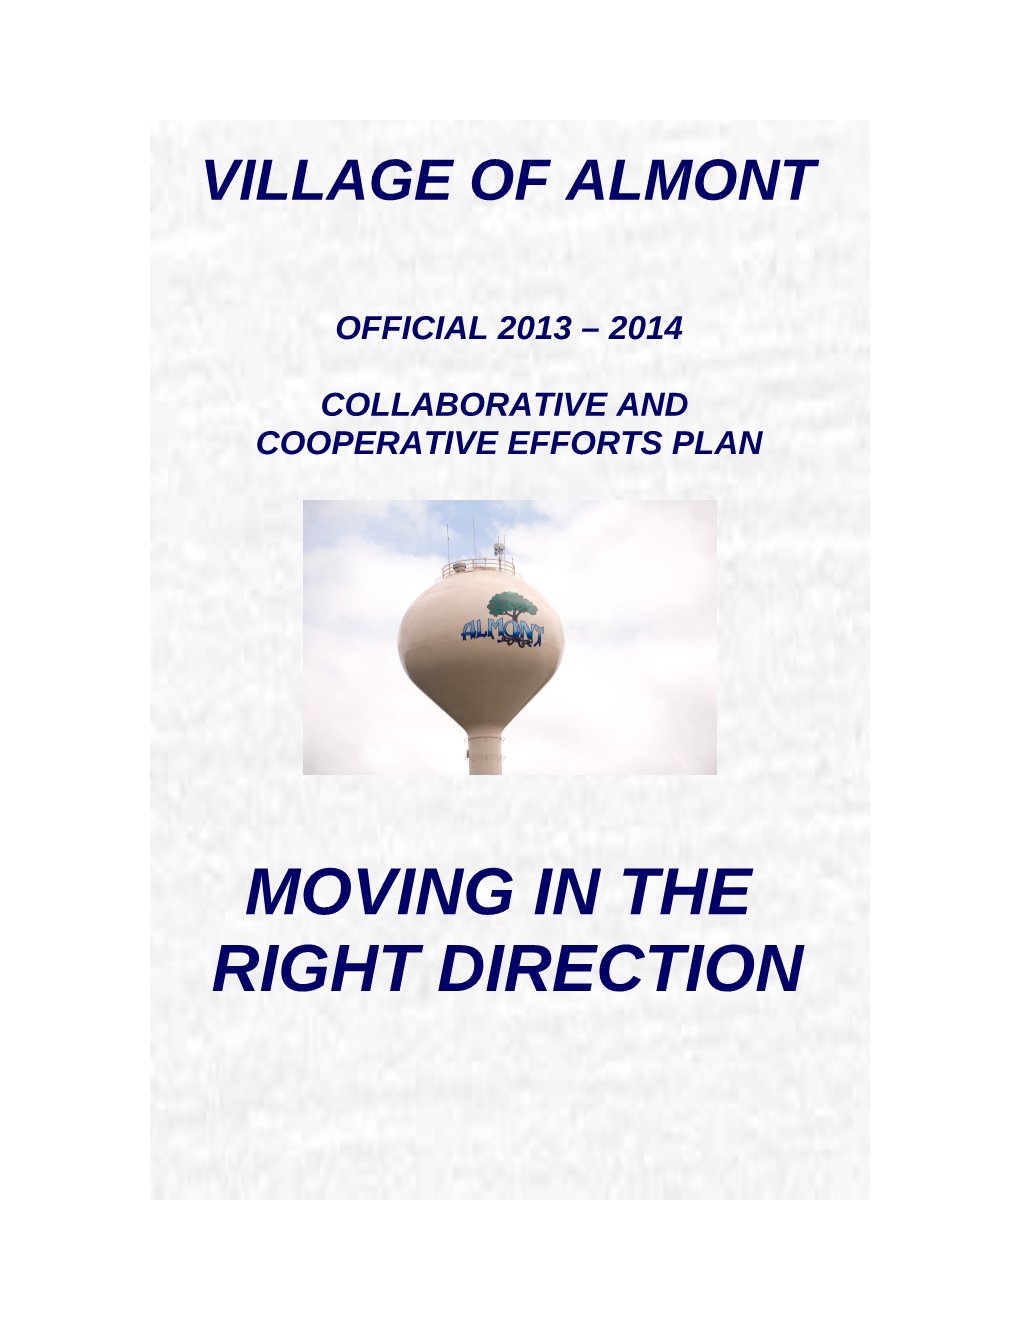 Village of Almont